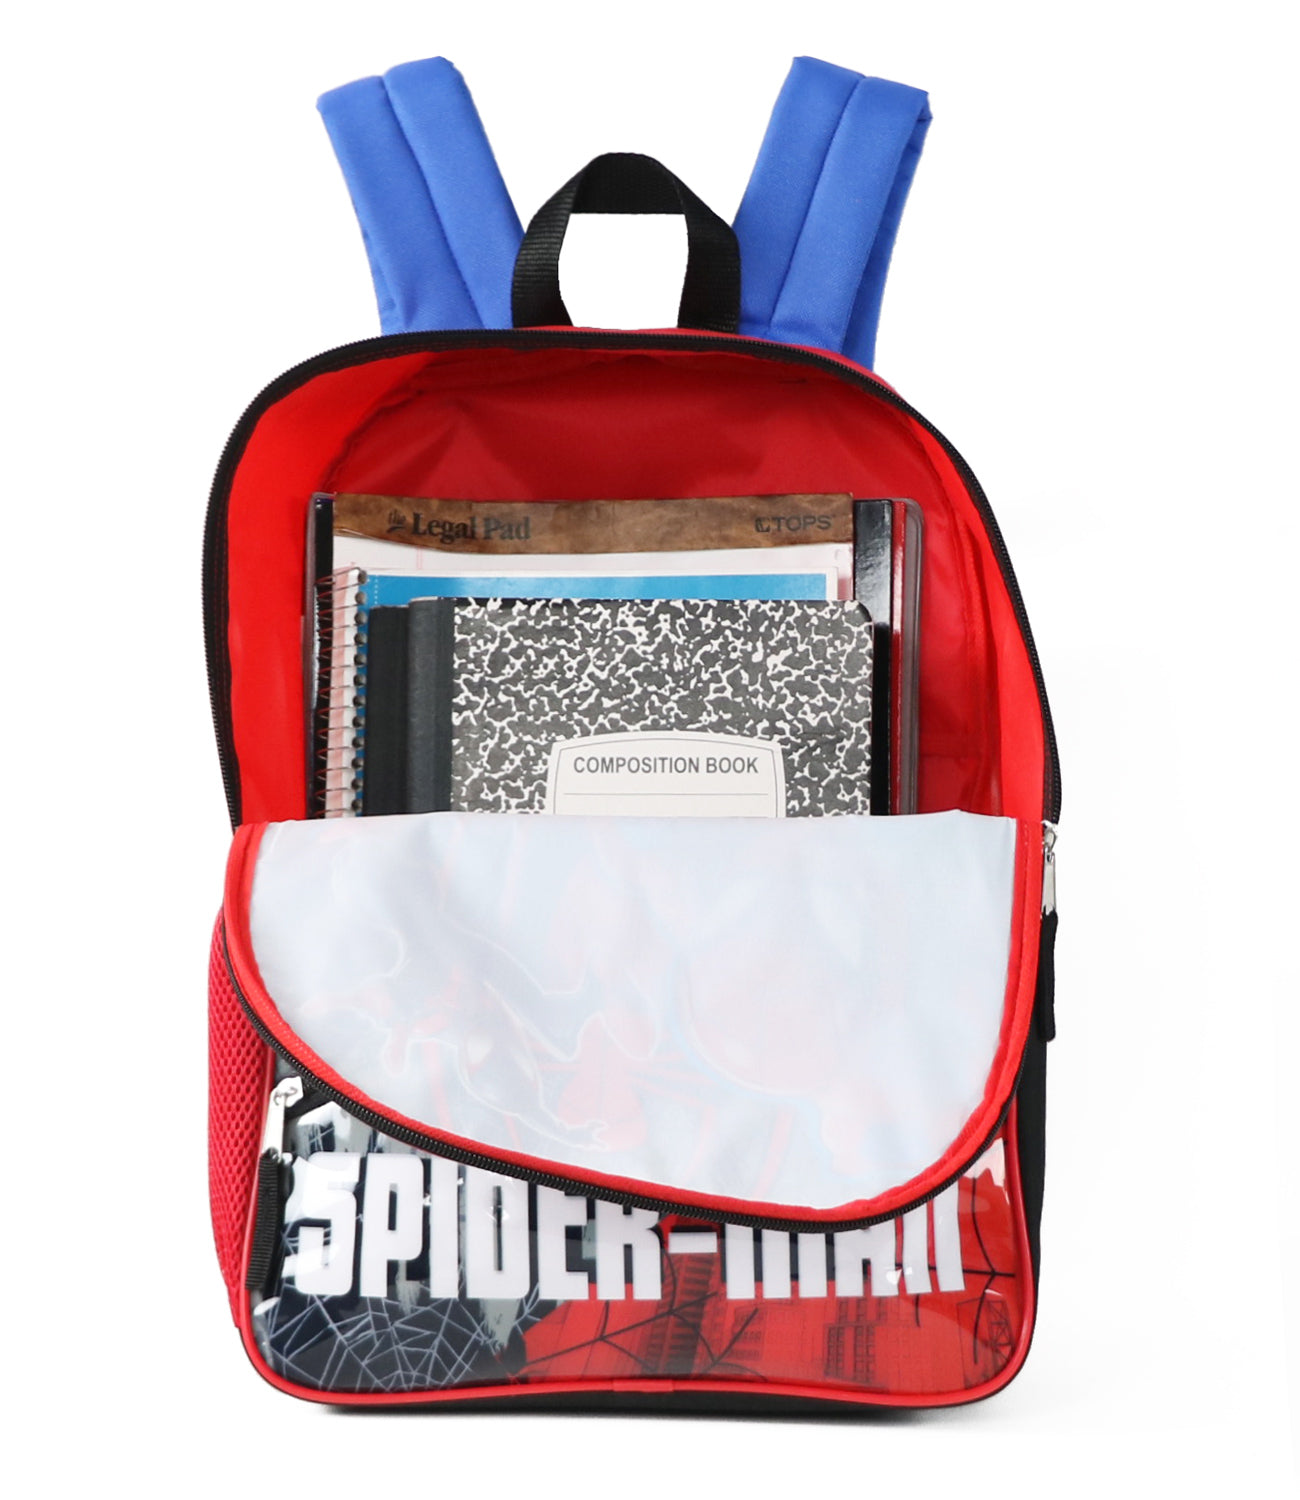 Marvel Spiderman Kids Backpack with Lunch Box, 2-Piece